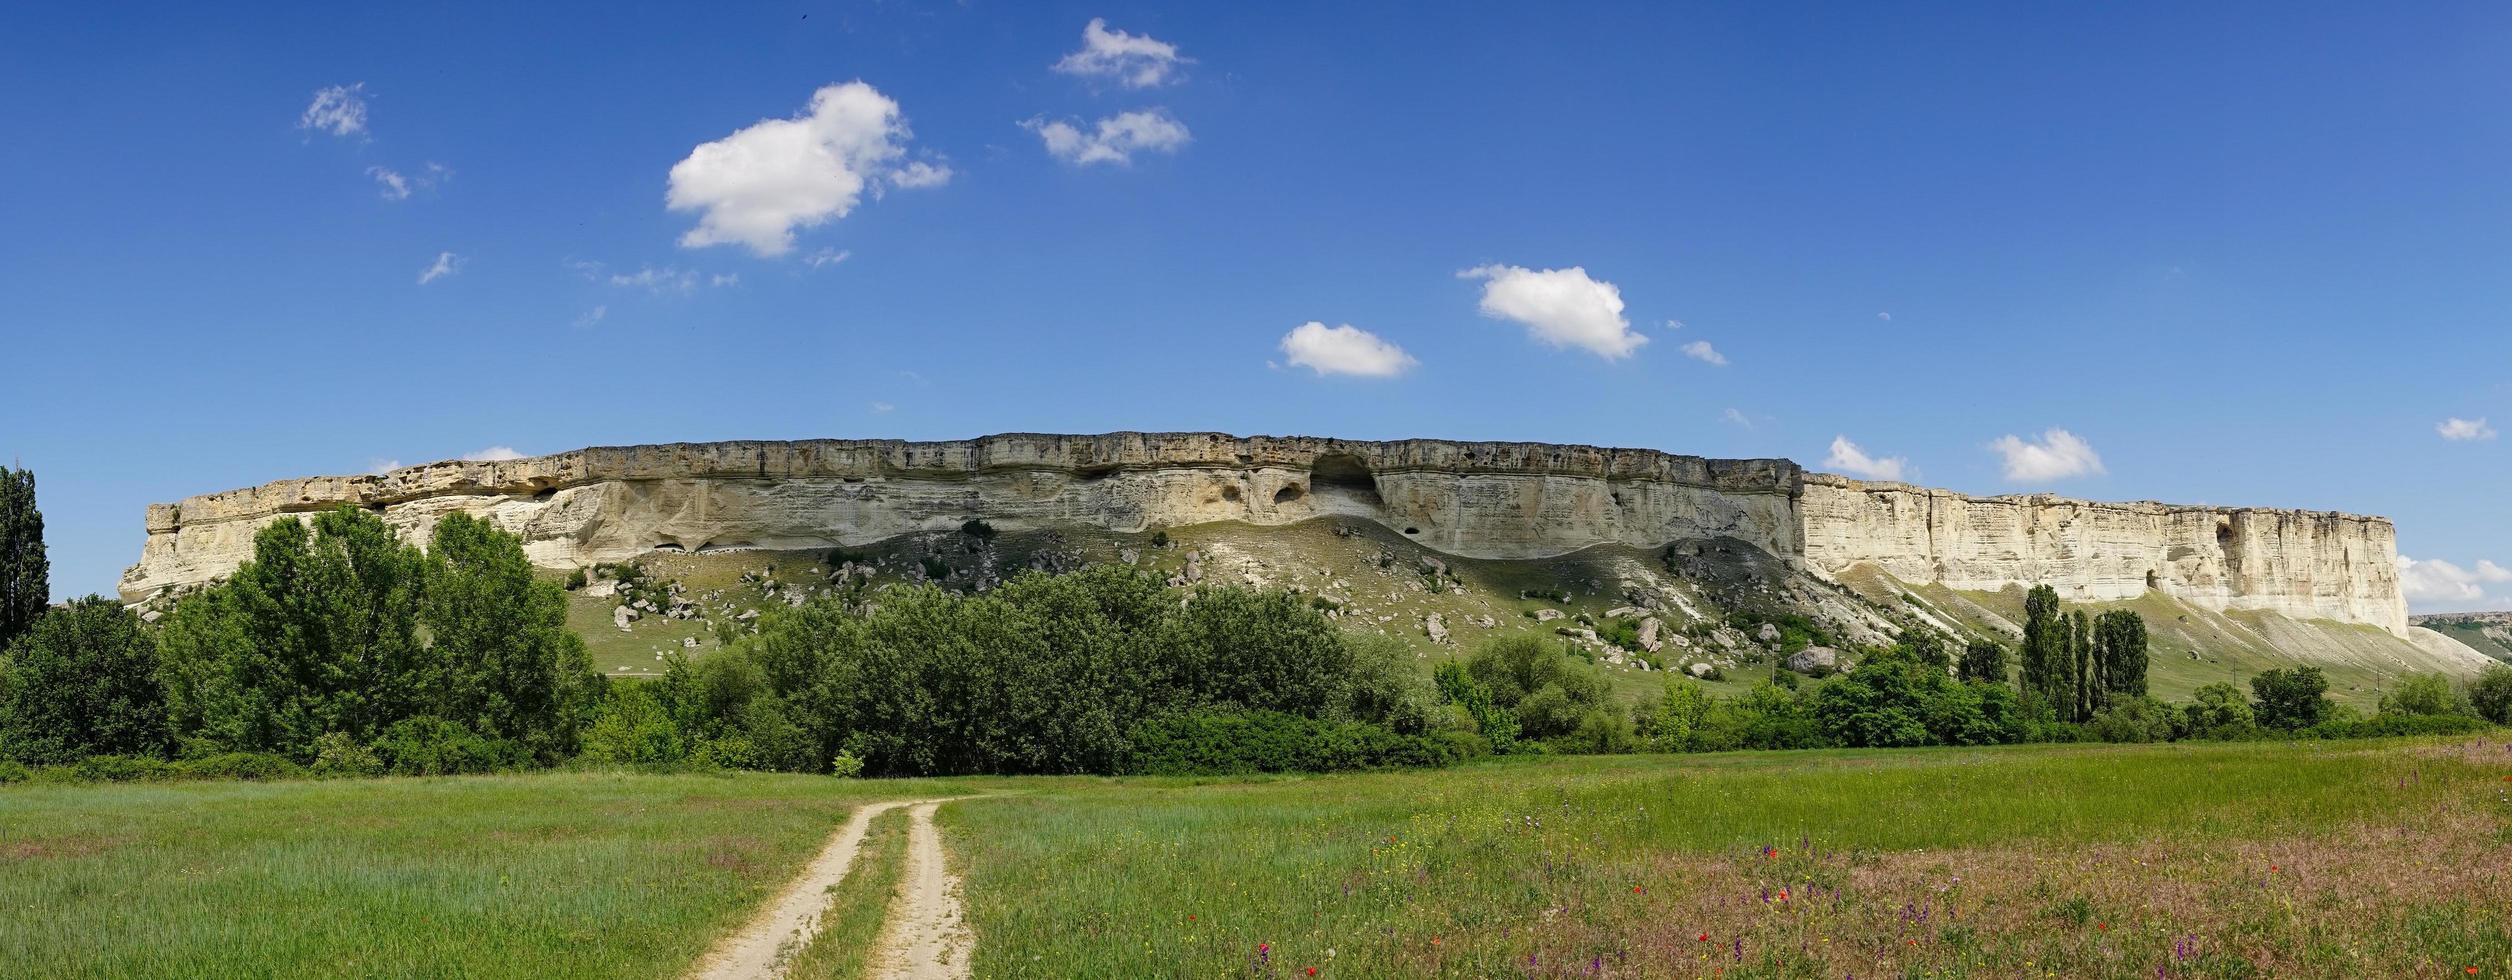 Panorama of the mountain landscape of AK-Kay in the Crimea. photo